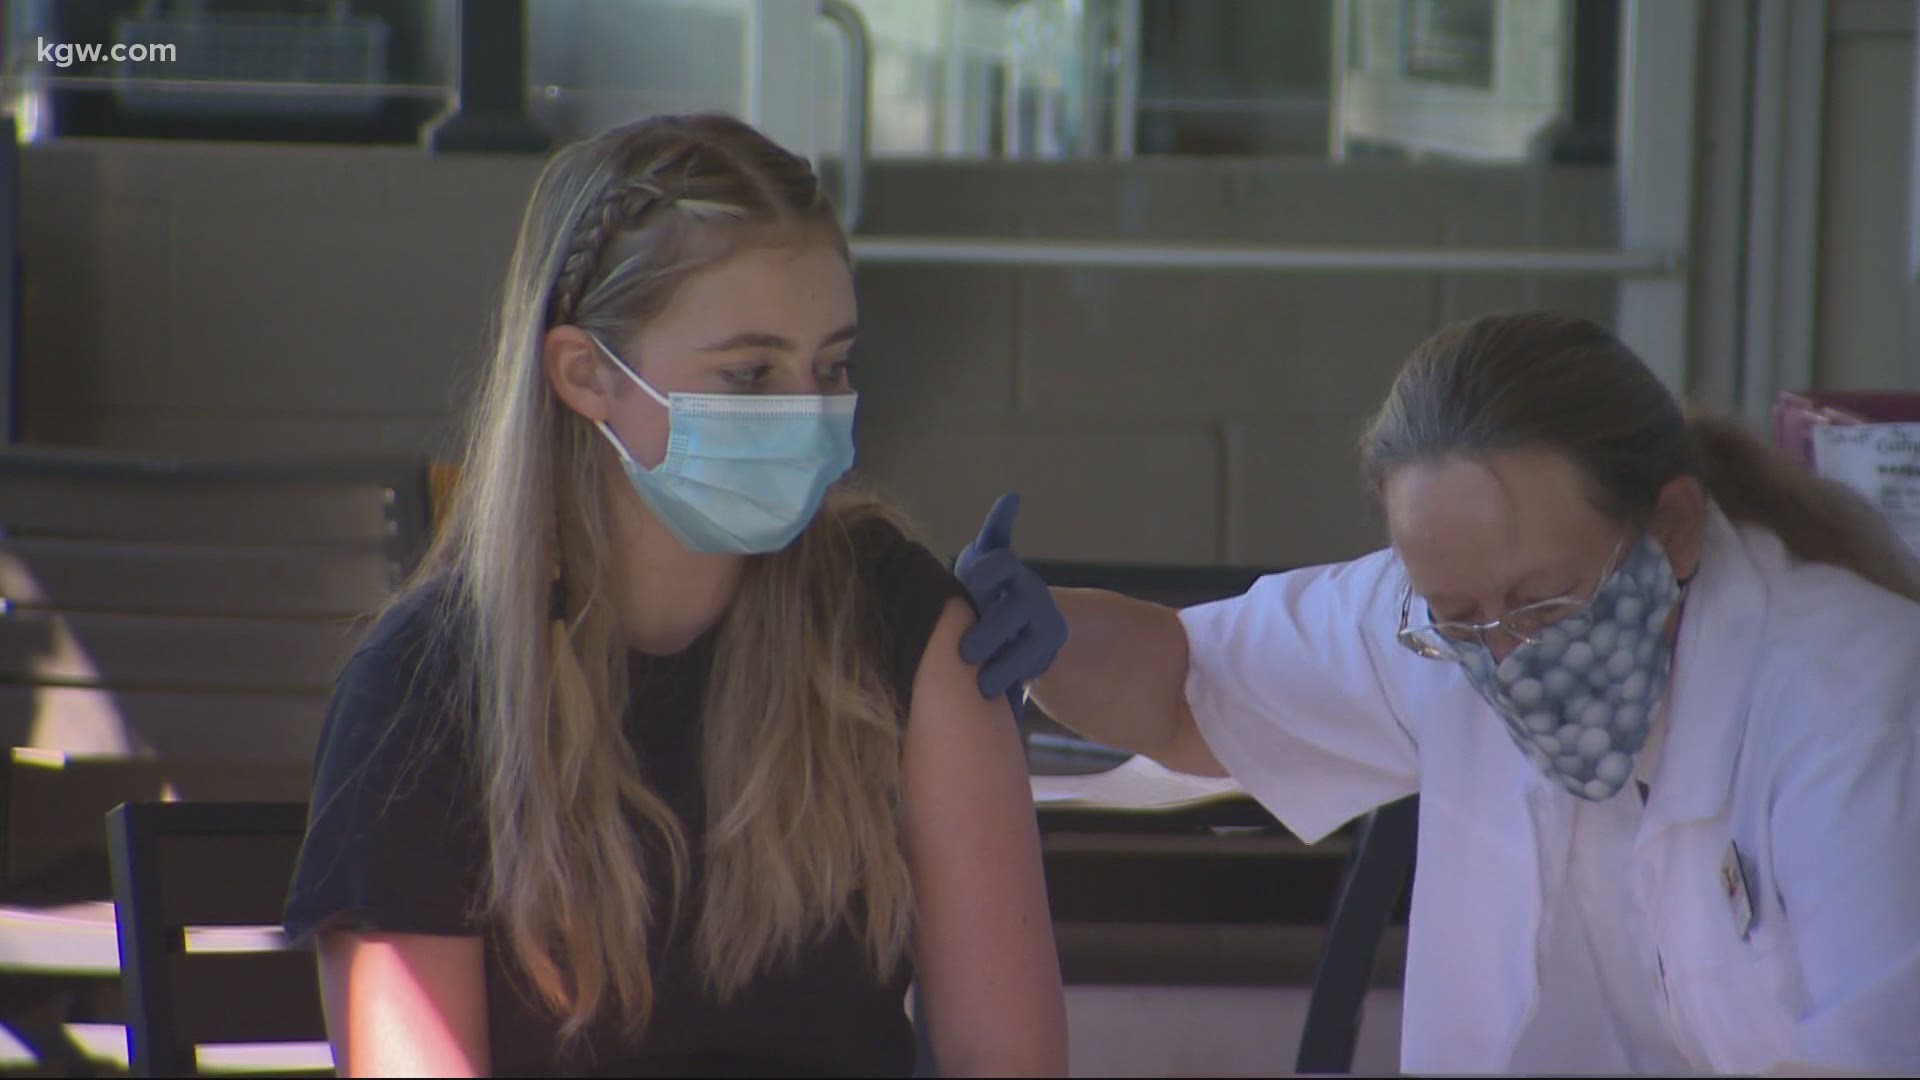 Health officials in Washington say this year’s flu shot is “essential.” Tim Gordon reports.